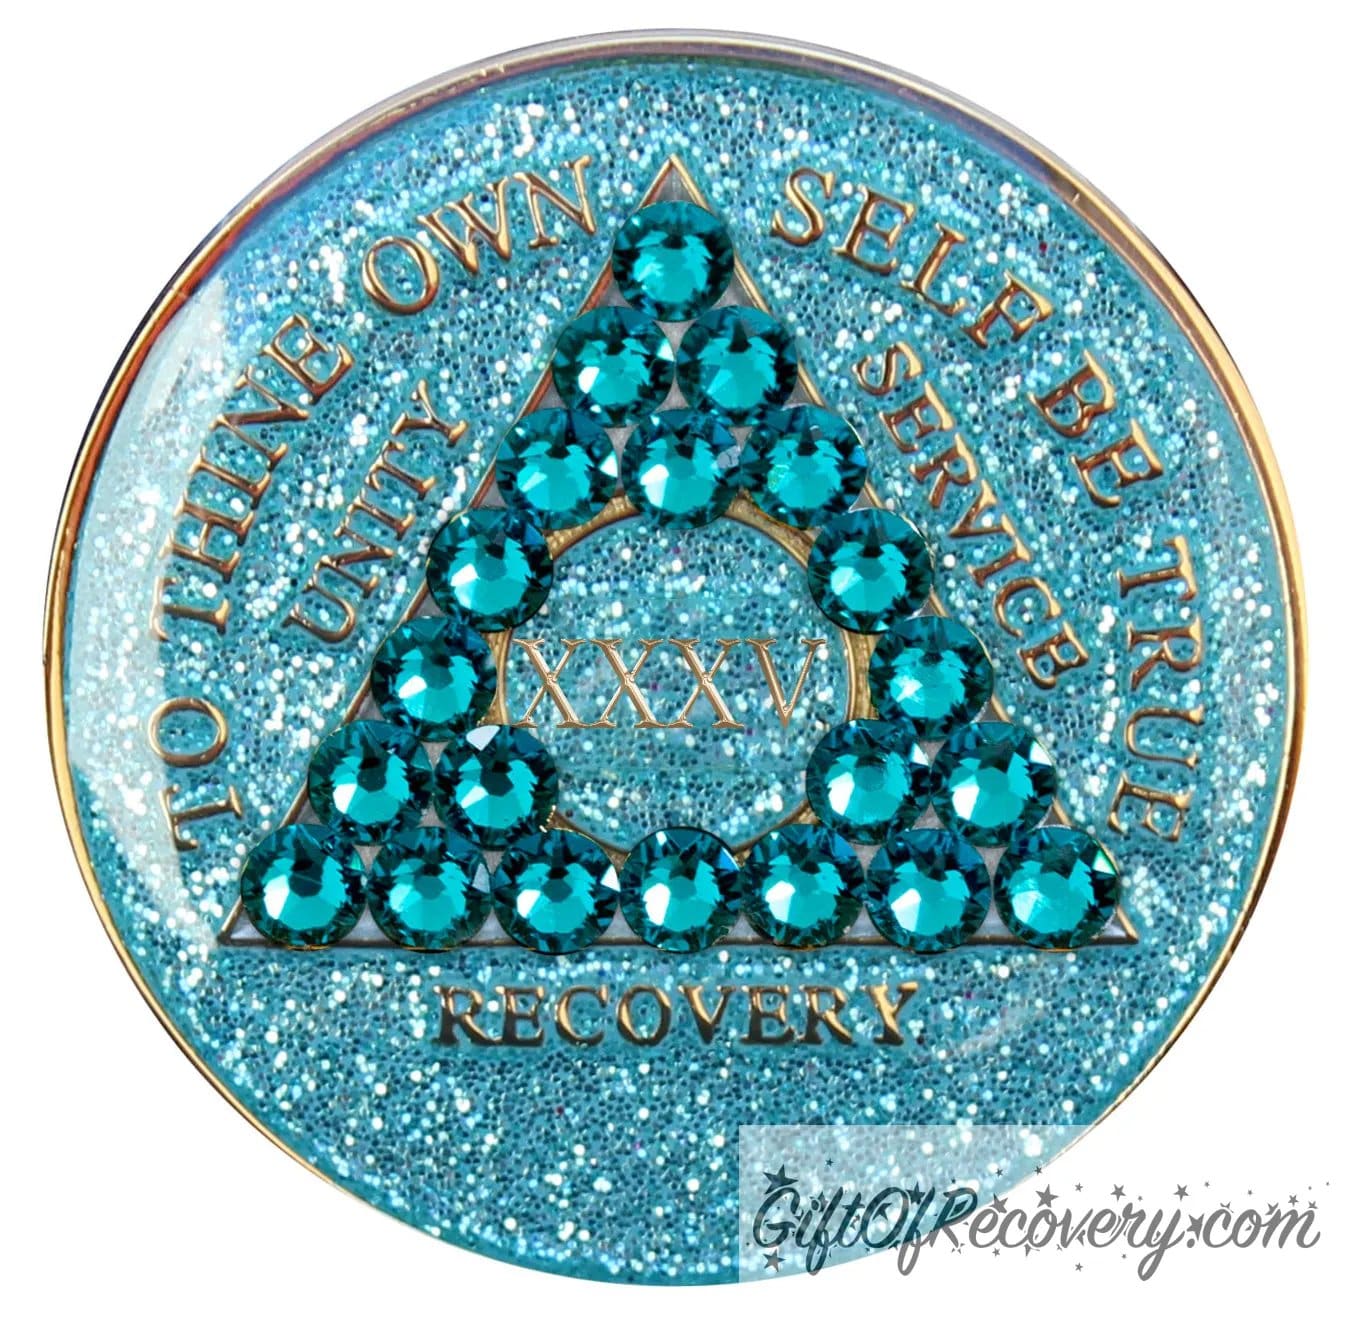 35 year AA medallion in aqua glitter with to thine own self be true, unity, service, recovery, the roman numeral in the center, and the outer rim of the medallion embossed in 14k gold plated brass, the center triangle has 21 genuine blue zircon crystal to give it a sparkle, it is sealed with resin for a shiny finish.